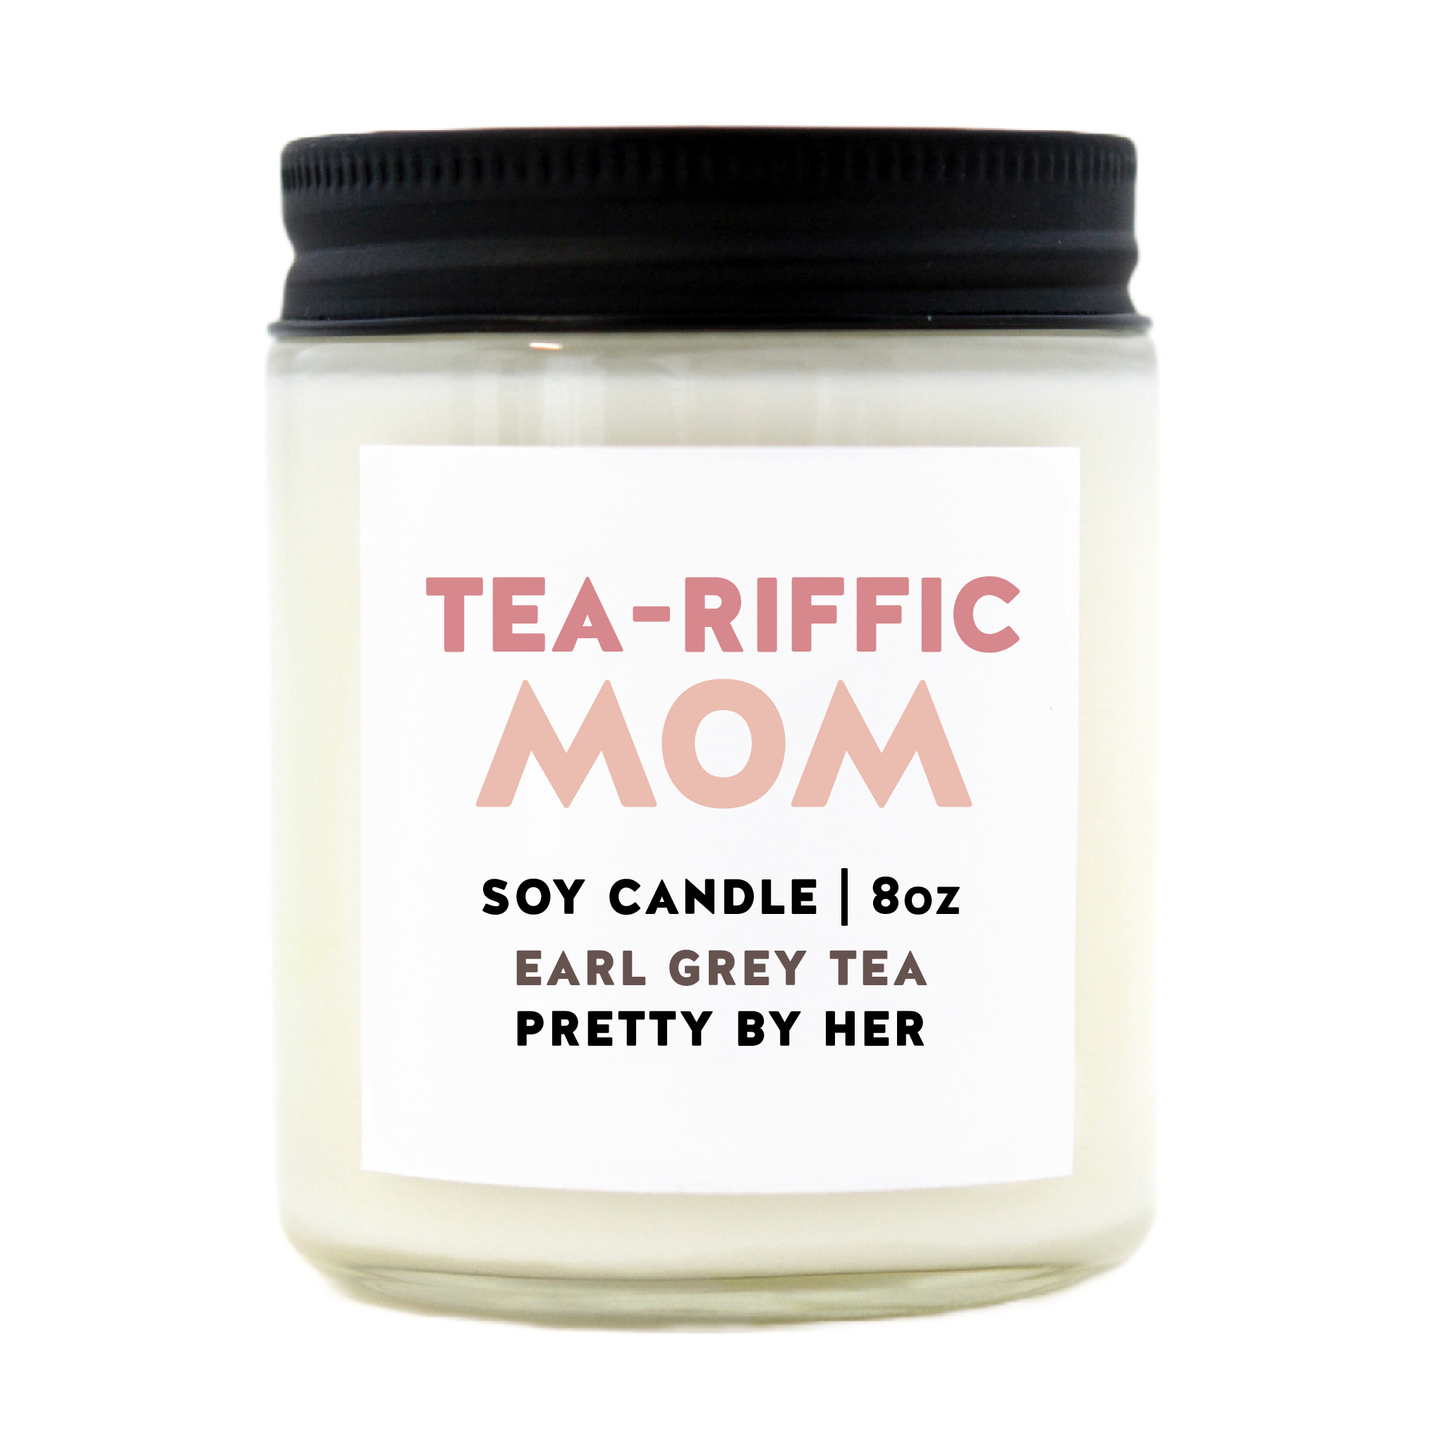 Tea-riffic Mom Spring Candle-pretty by her